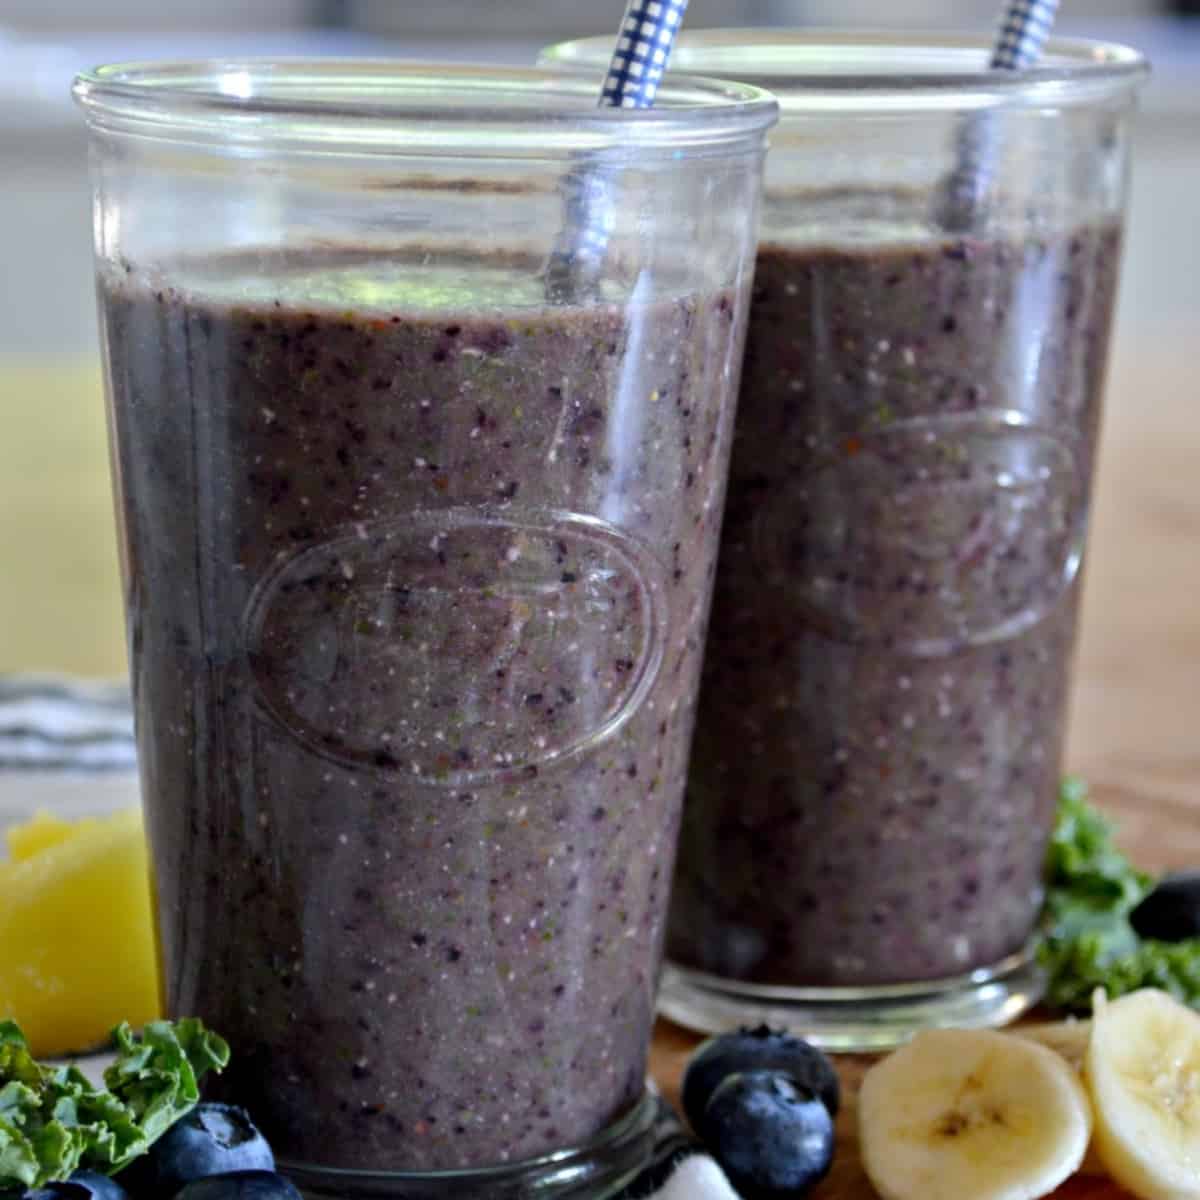 Kale Blueberry Smoothie – My Go-To Breakfast